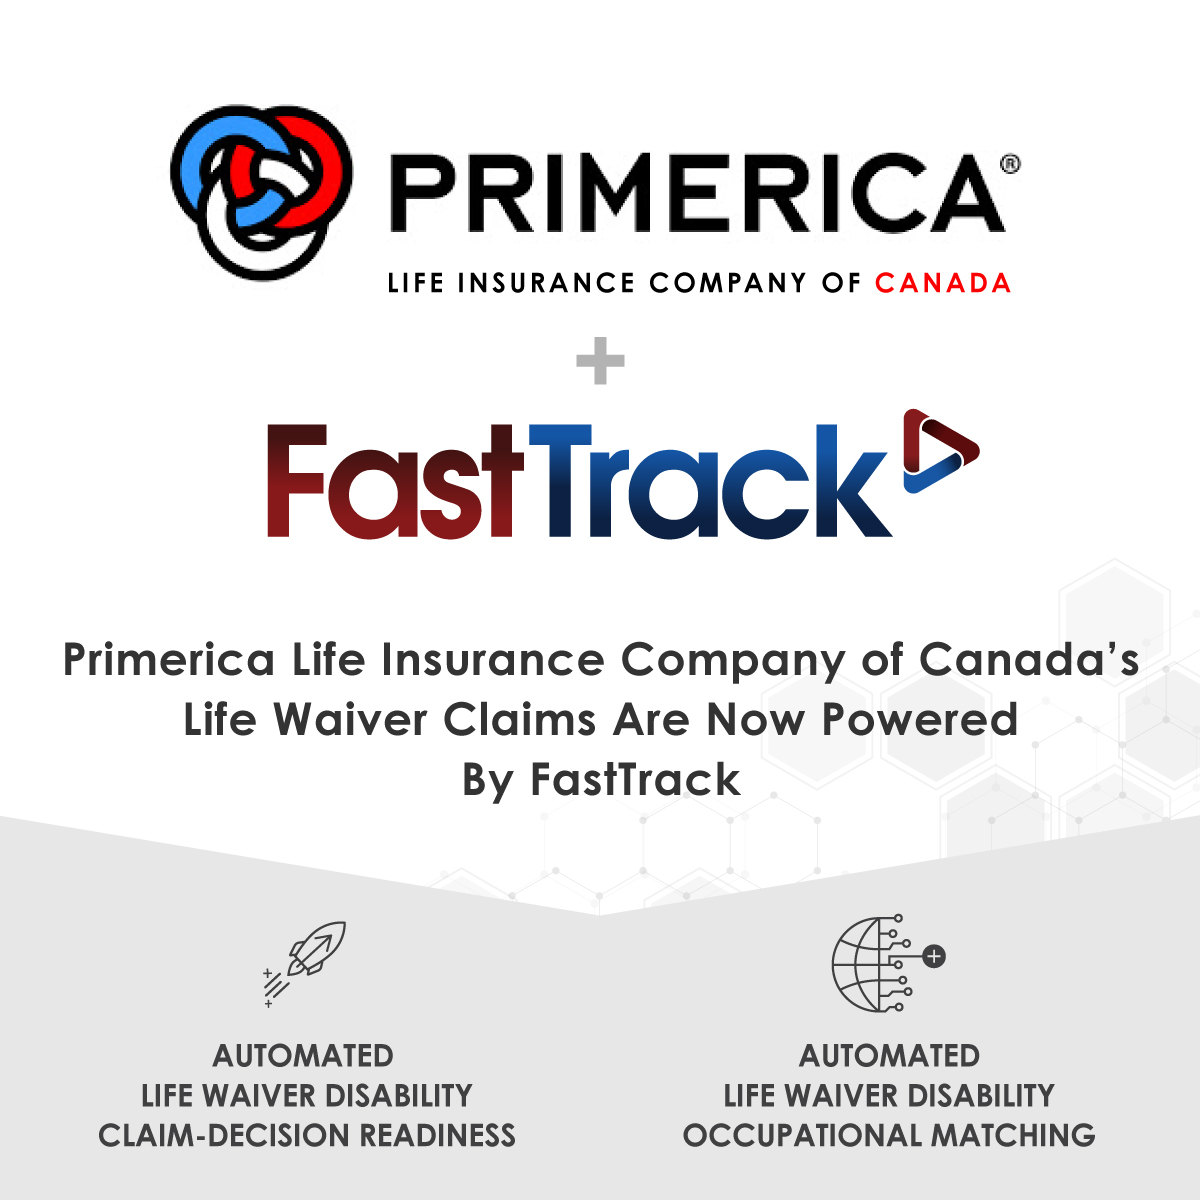 primerica-life-insurance-company-of-canada-partners-with-fasttrack-for